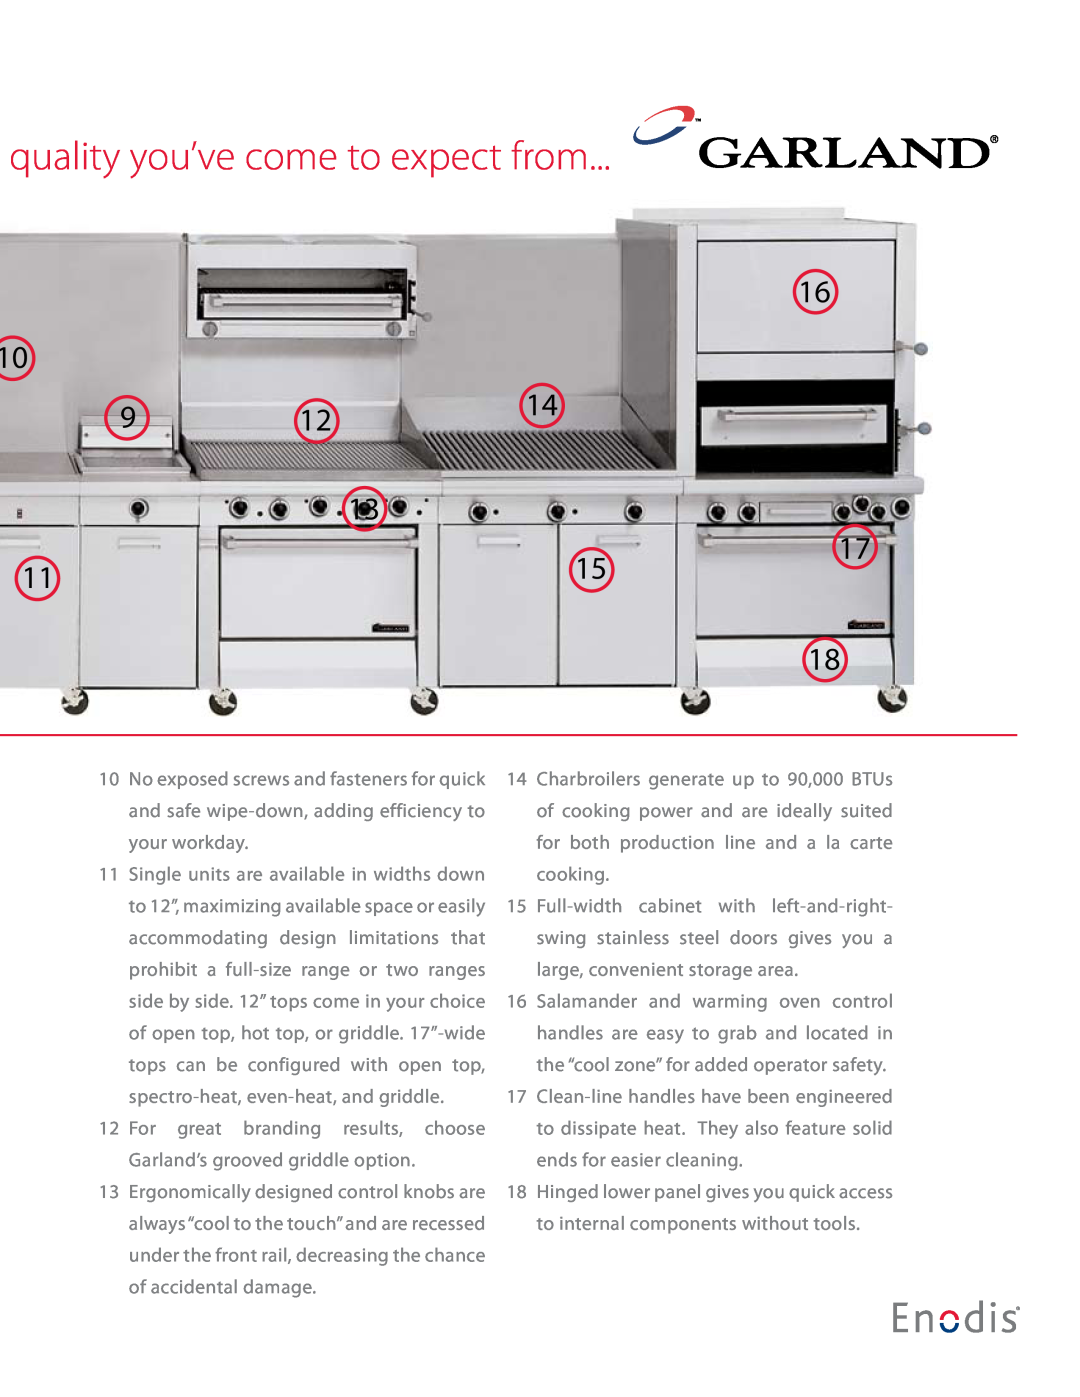 Garland Master Series manual quality you’ve come to expect from 